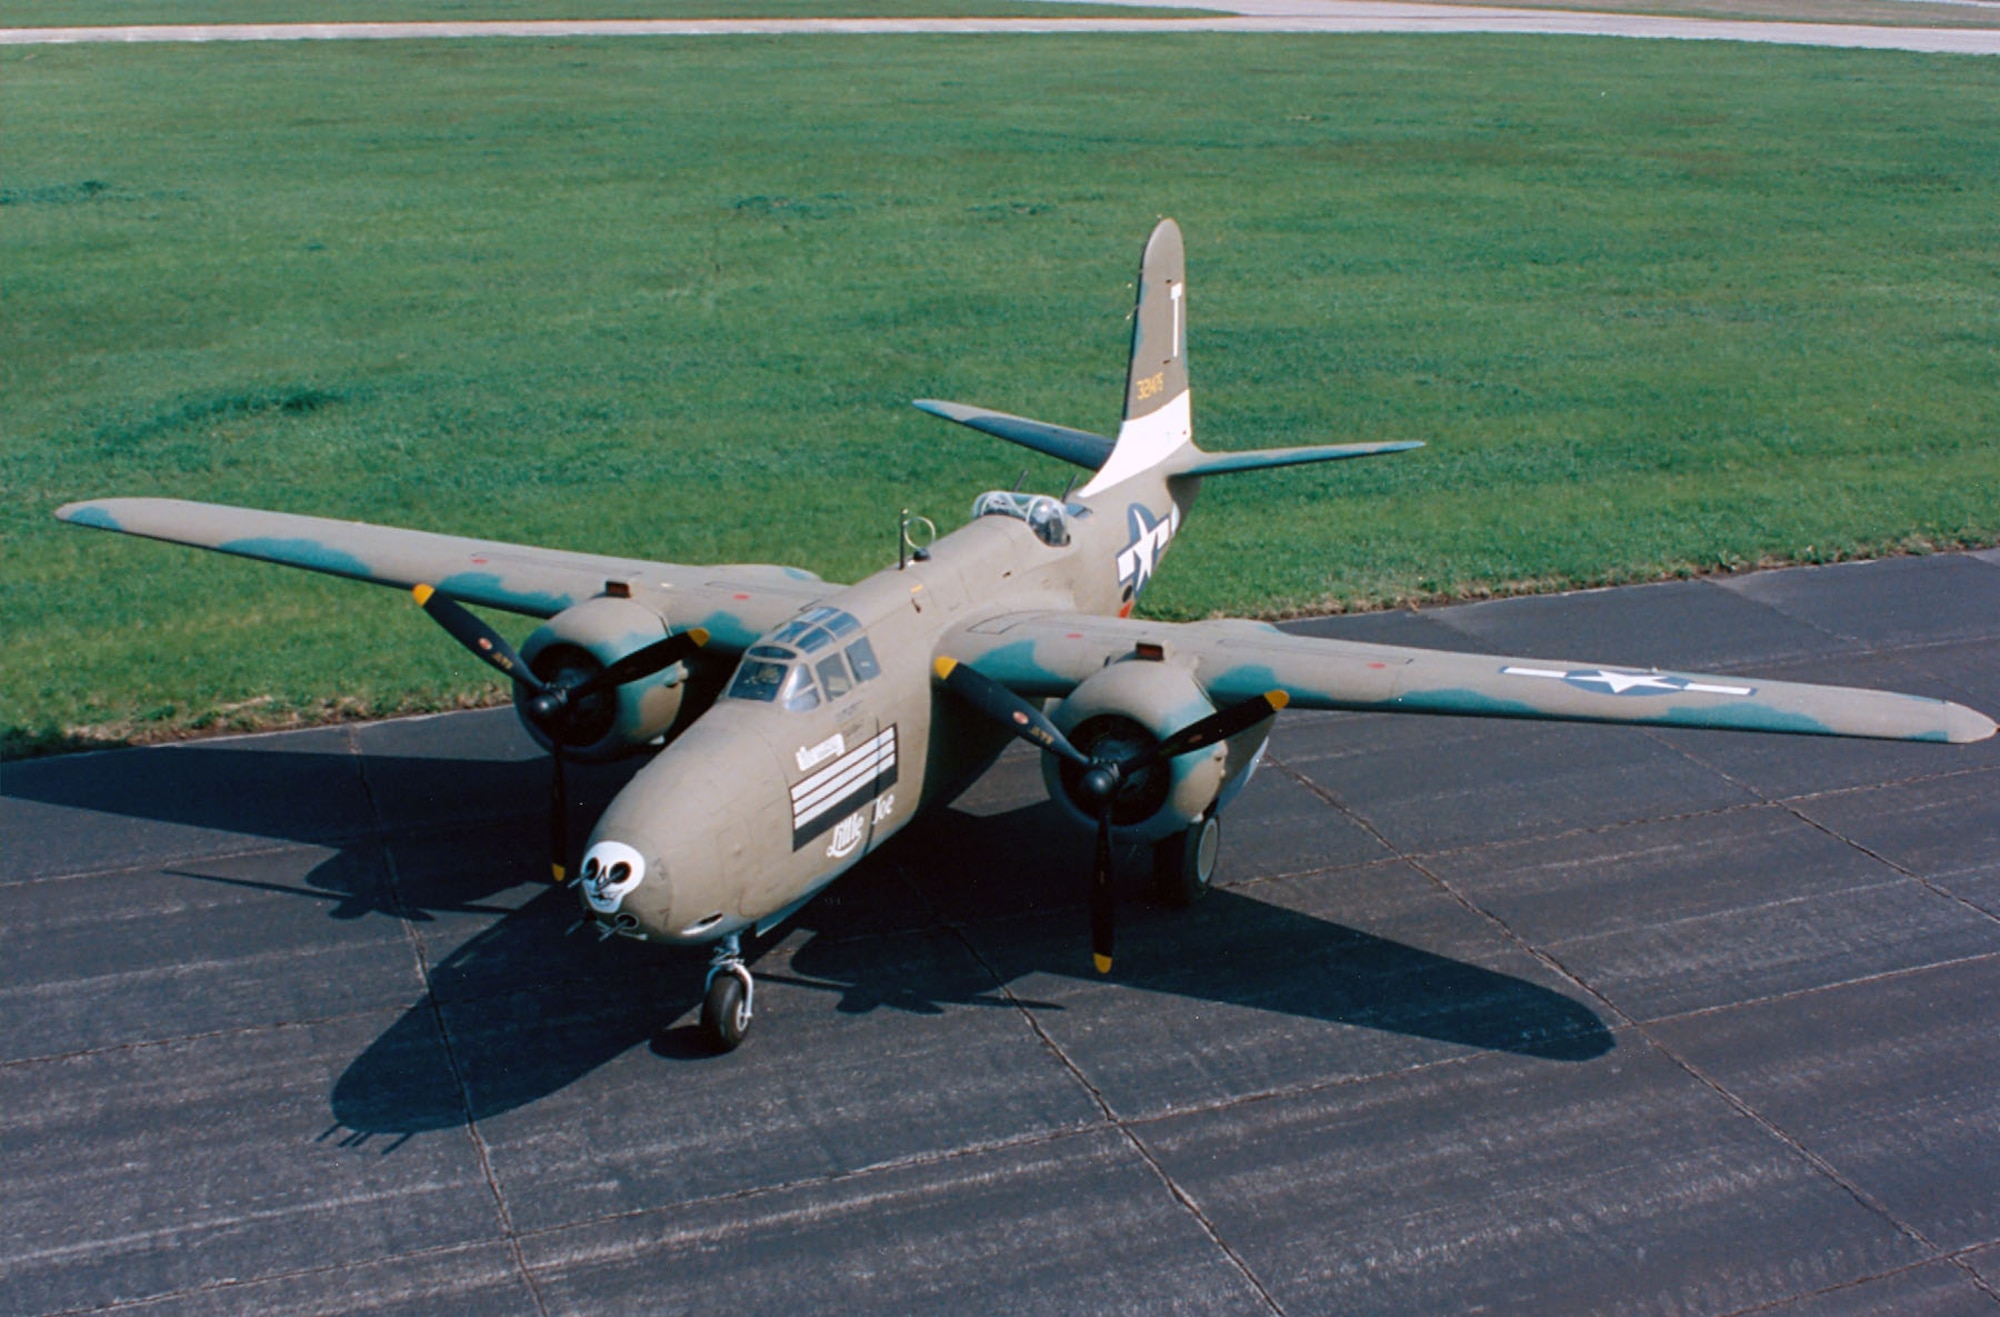 DAYTON, Ohio -- Douglas A-20G Havoc at the National Museum of the United States Air Force. (U.S. Air Force photo)